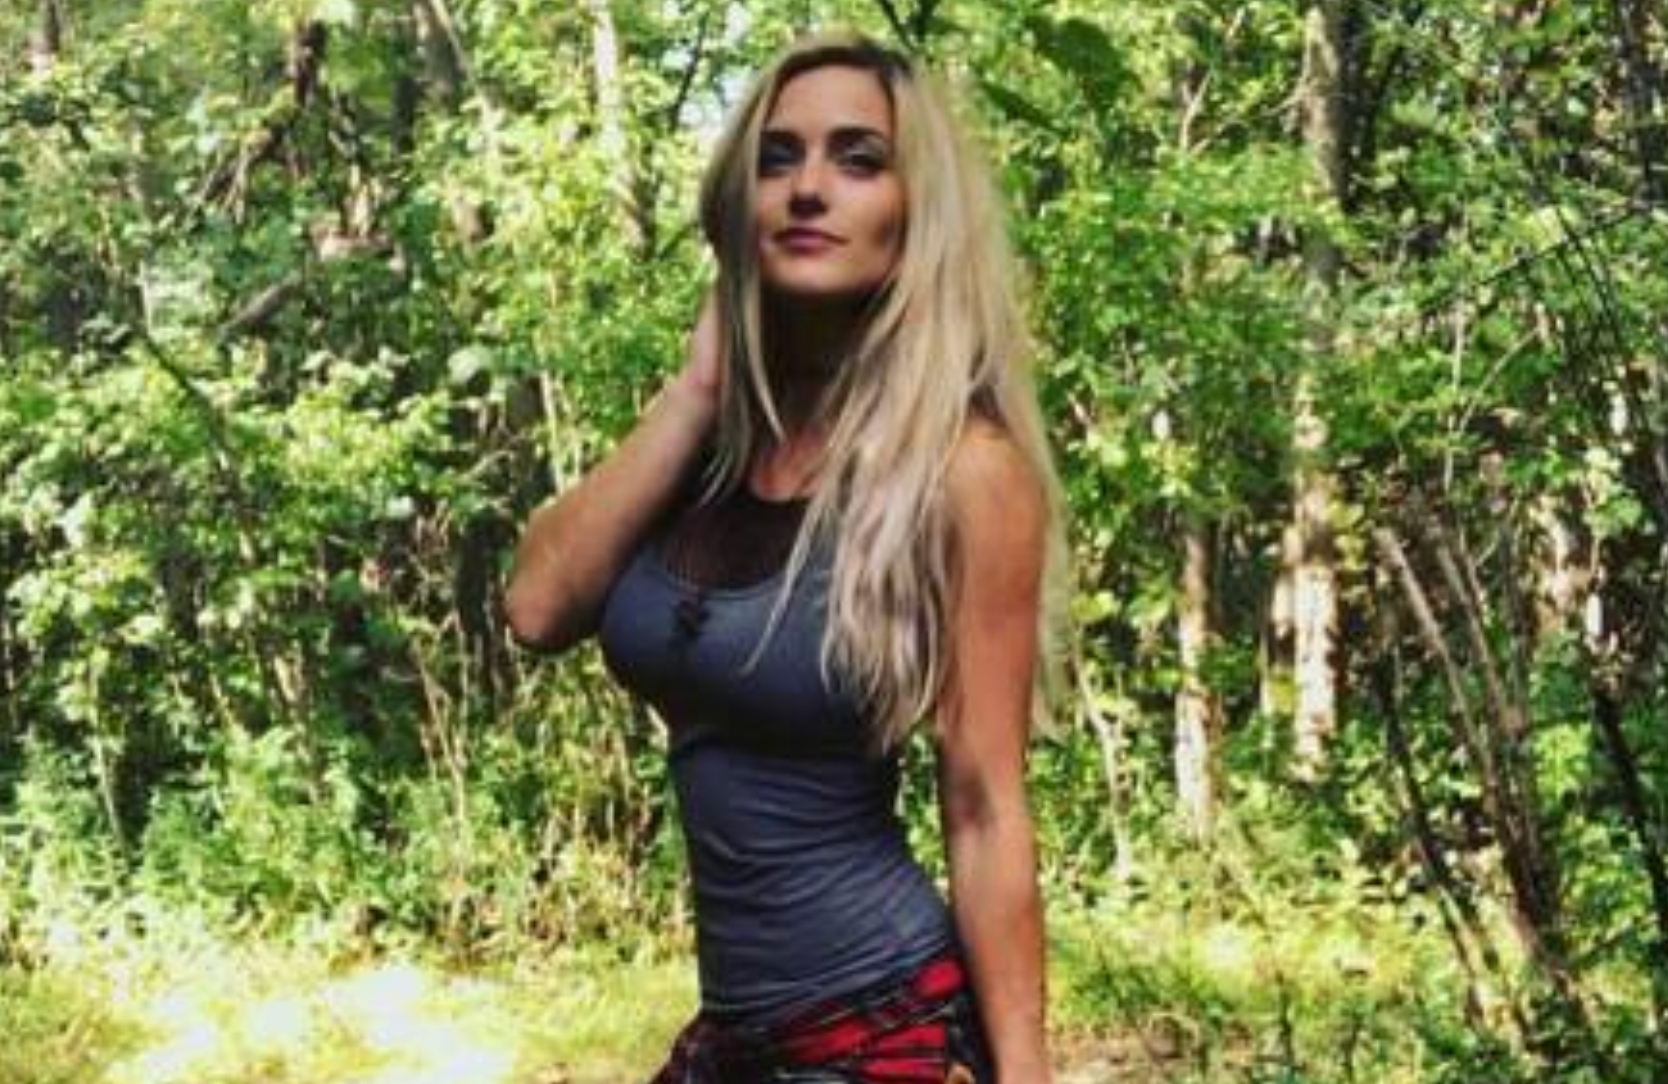 Melissa from naked and afraid ❤️ Best adult photos at doai image photo